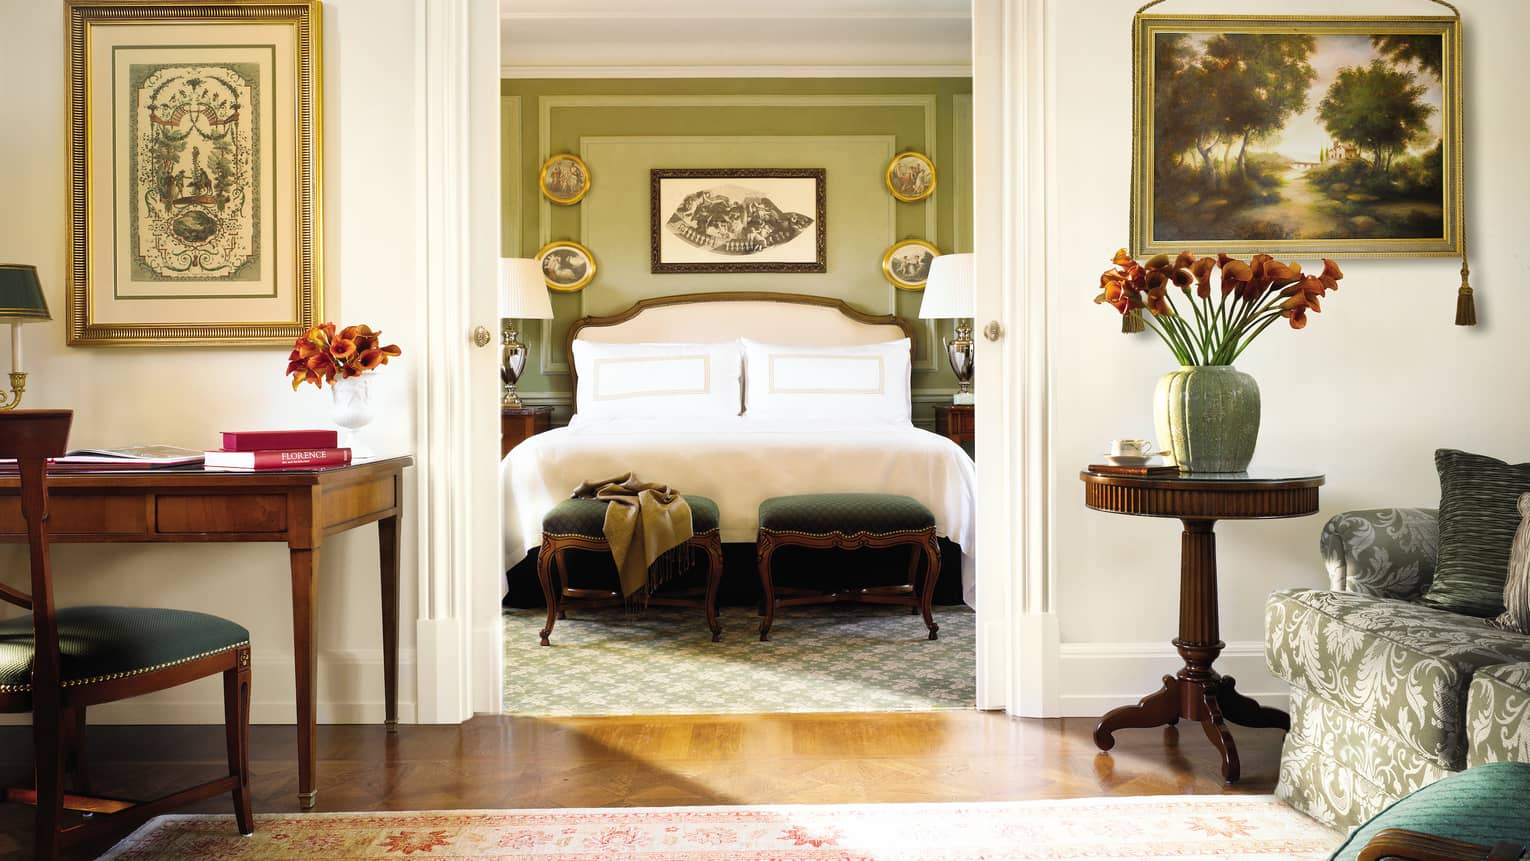 Four Seasons Executive Suite desk, chair by bedroom doorway, bed and scarf across green footstools